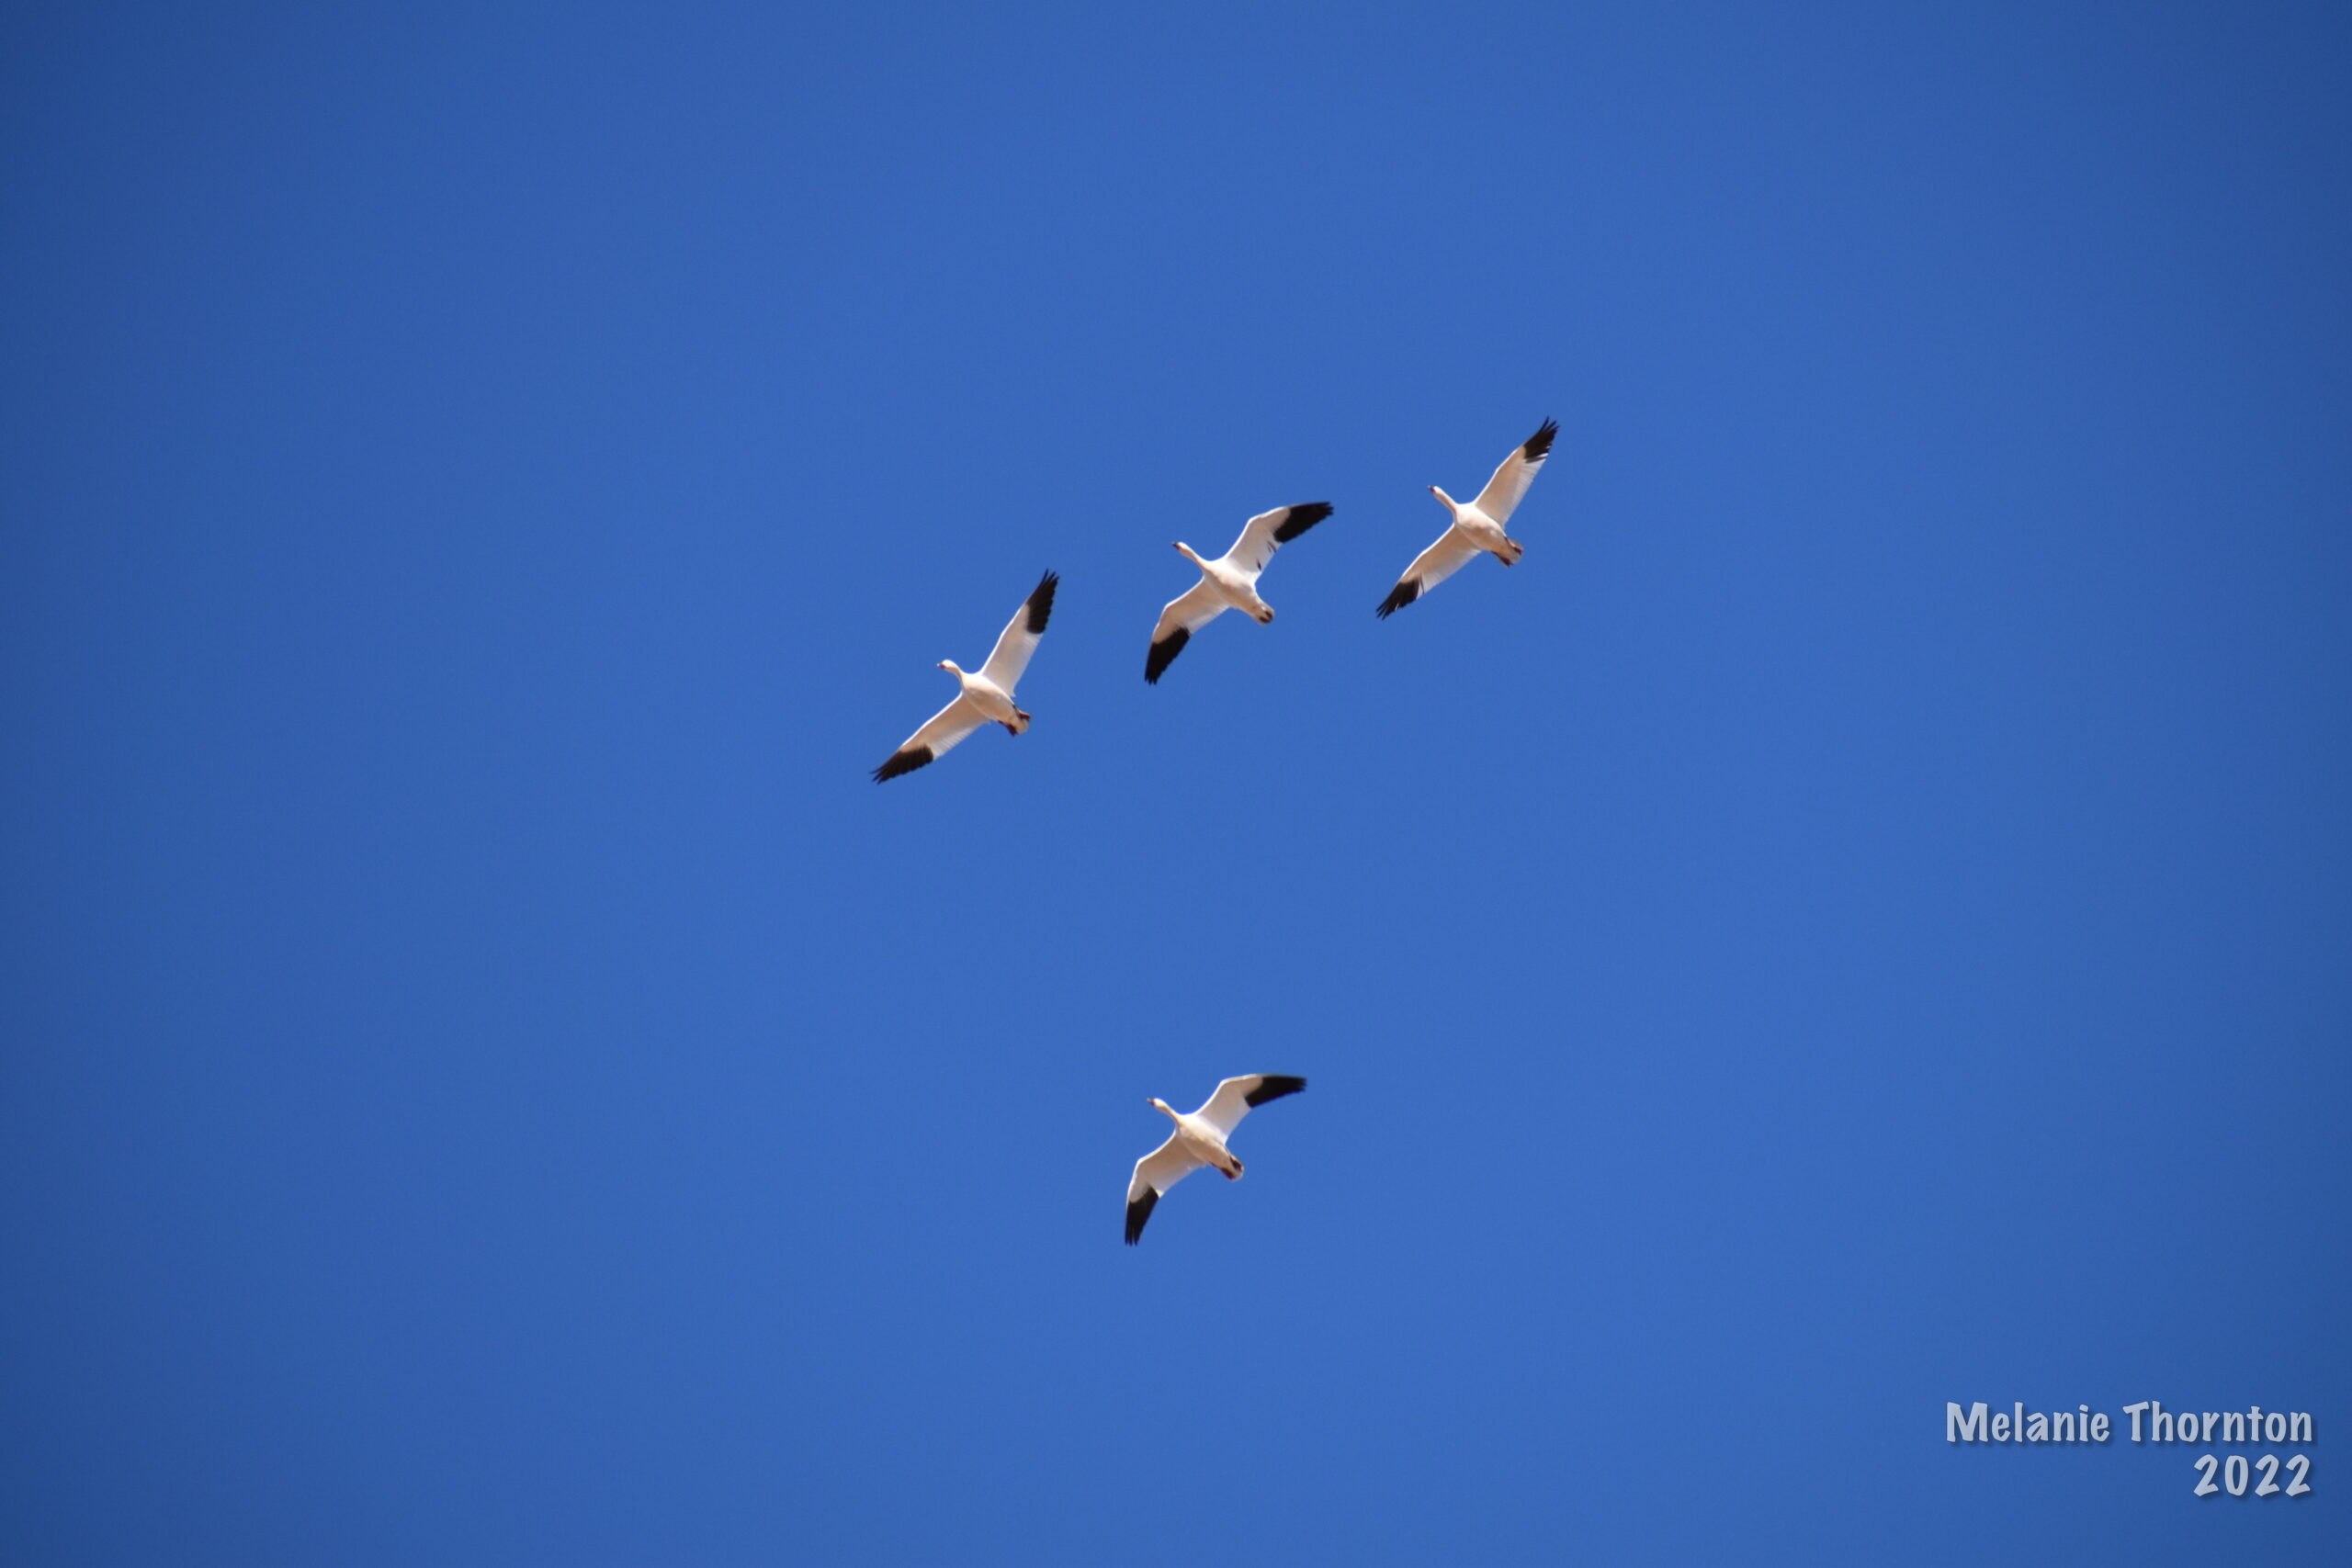 Four large white birds with black tips fly in formation against a bright blue sky